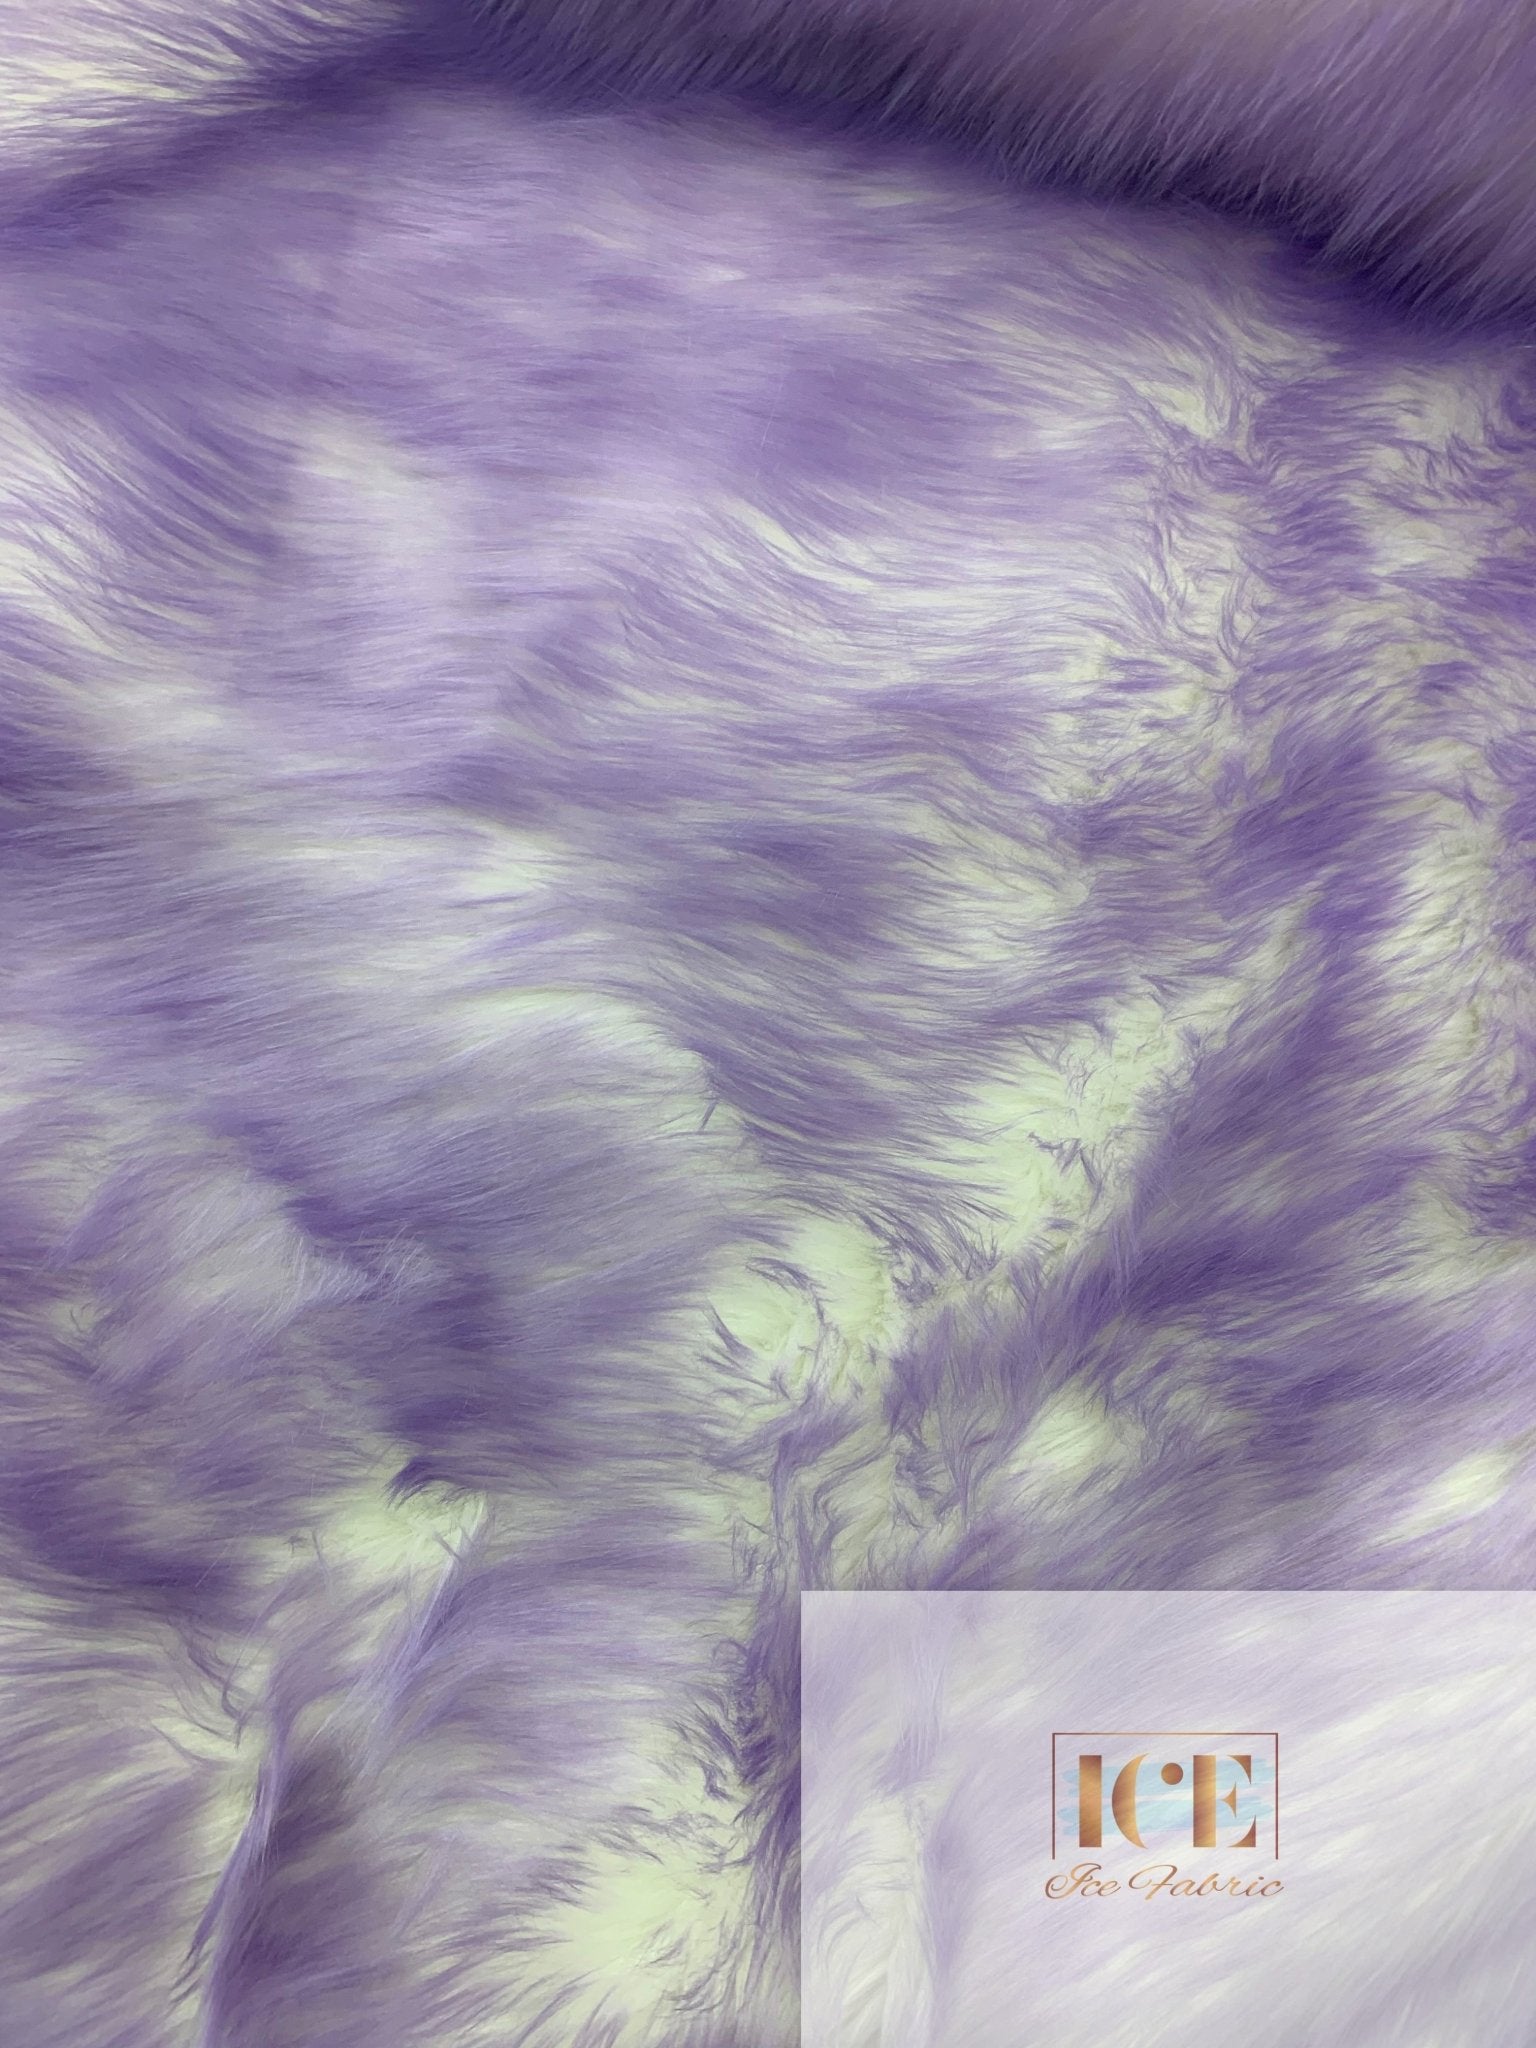 Canadian Fox 2 Tone Shaggy Long Pile Faux Fur Fabric For Blankets, Costumes, Bed SpreadICEFABRICICE FABRICSNavy BlueBy The Yard (60 inches Wide)Canadian Fox 2 Tone Shaggy Long Pile Faux Fur Fabric For Blankets, Costumes, Bed Spread ICEFABRIC Lilac